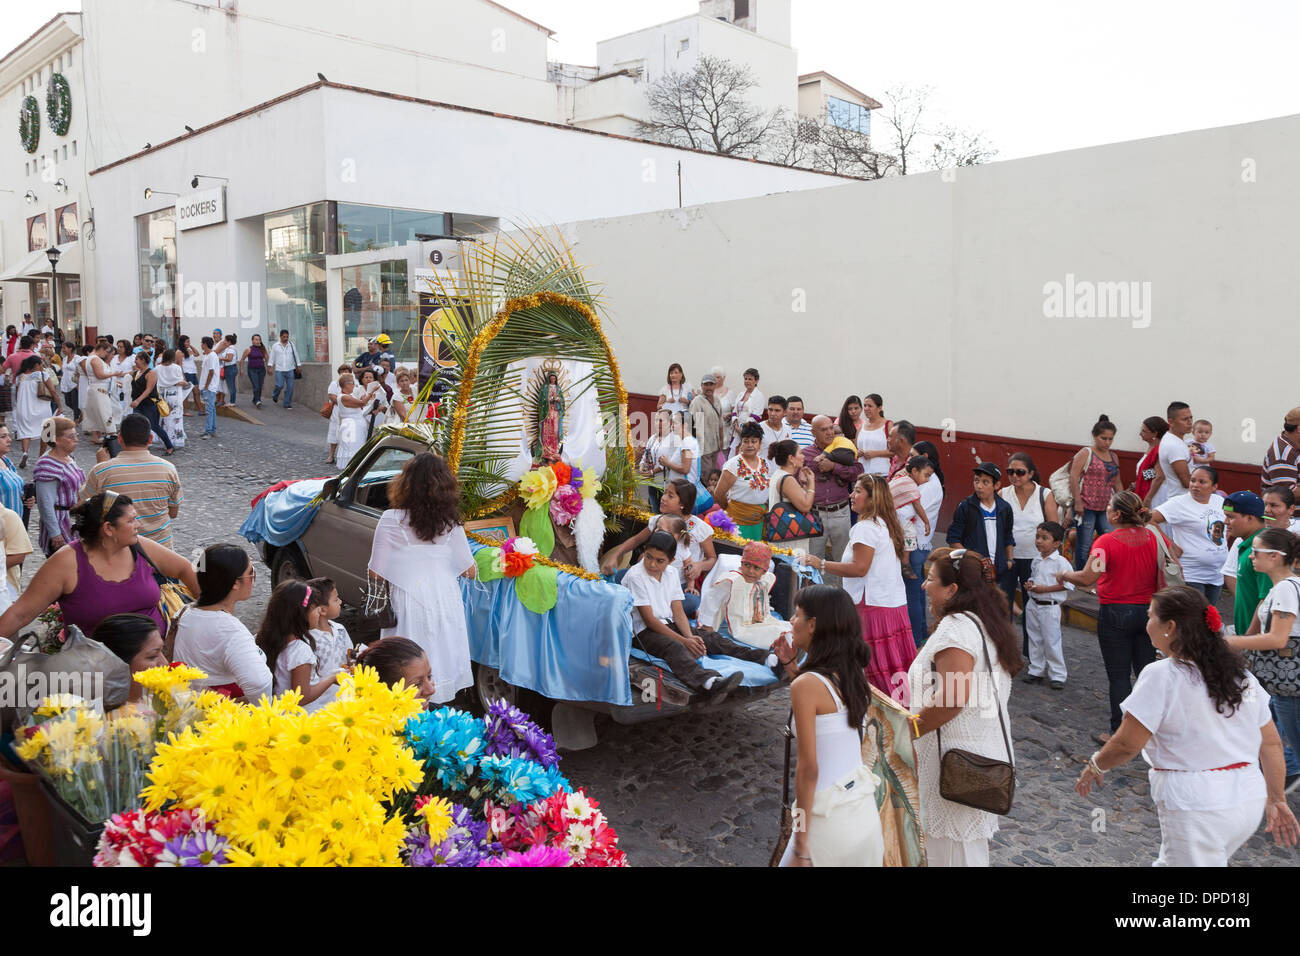 Religious procession celebrating the Festival of Our Lady of Guadalupe - Puerto Vallarta, Jalisco, Mexico Stock Photo